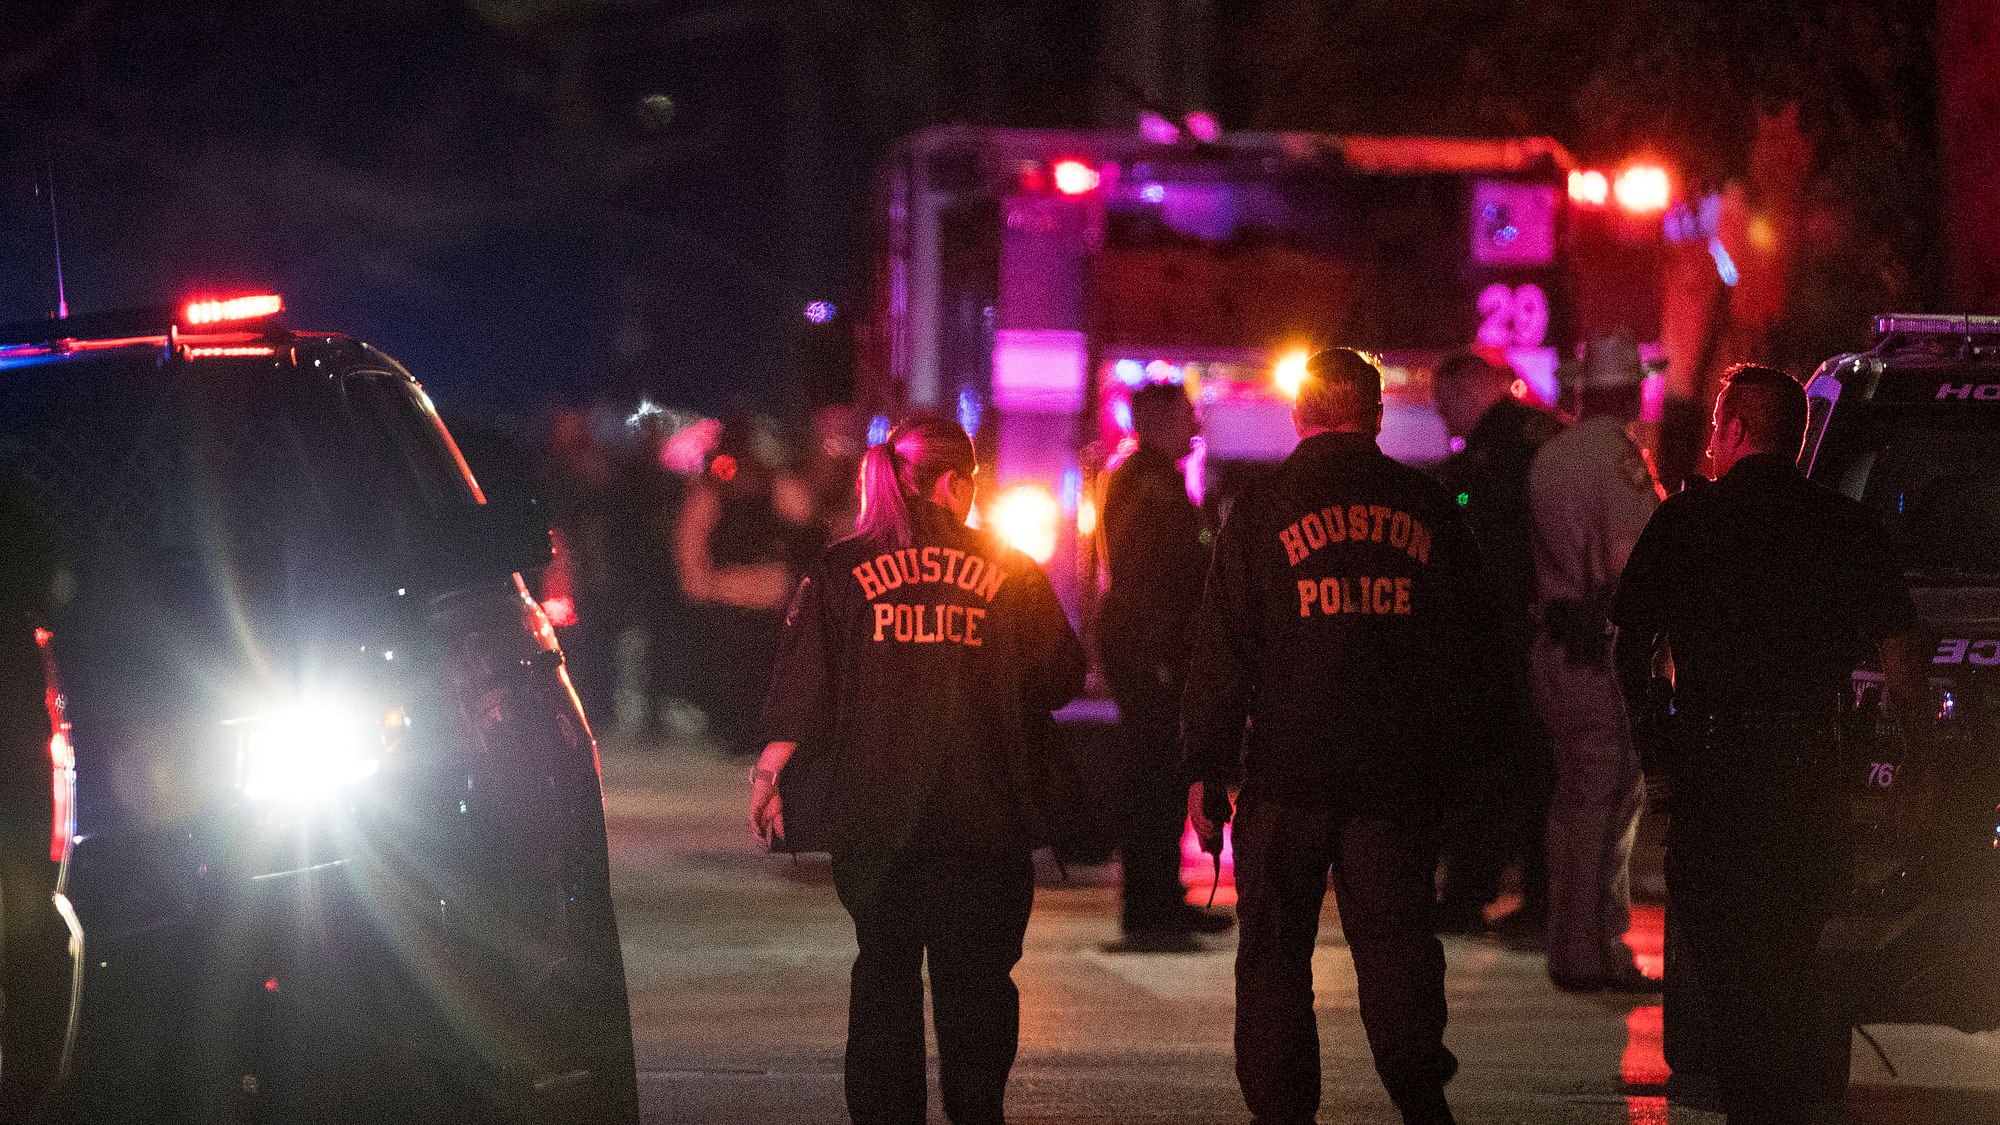 Police investigate the scene where several Houston police officers were shot in Houston on Monday, 28 January 2019.